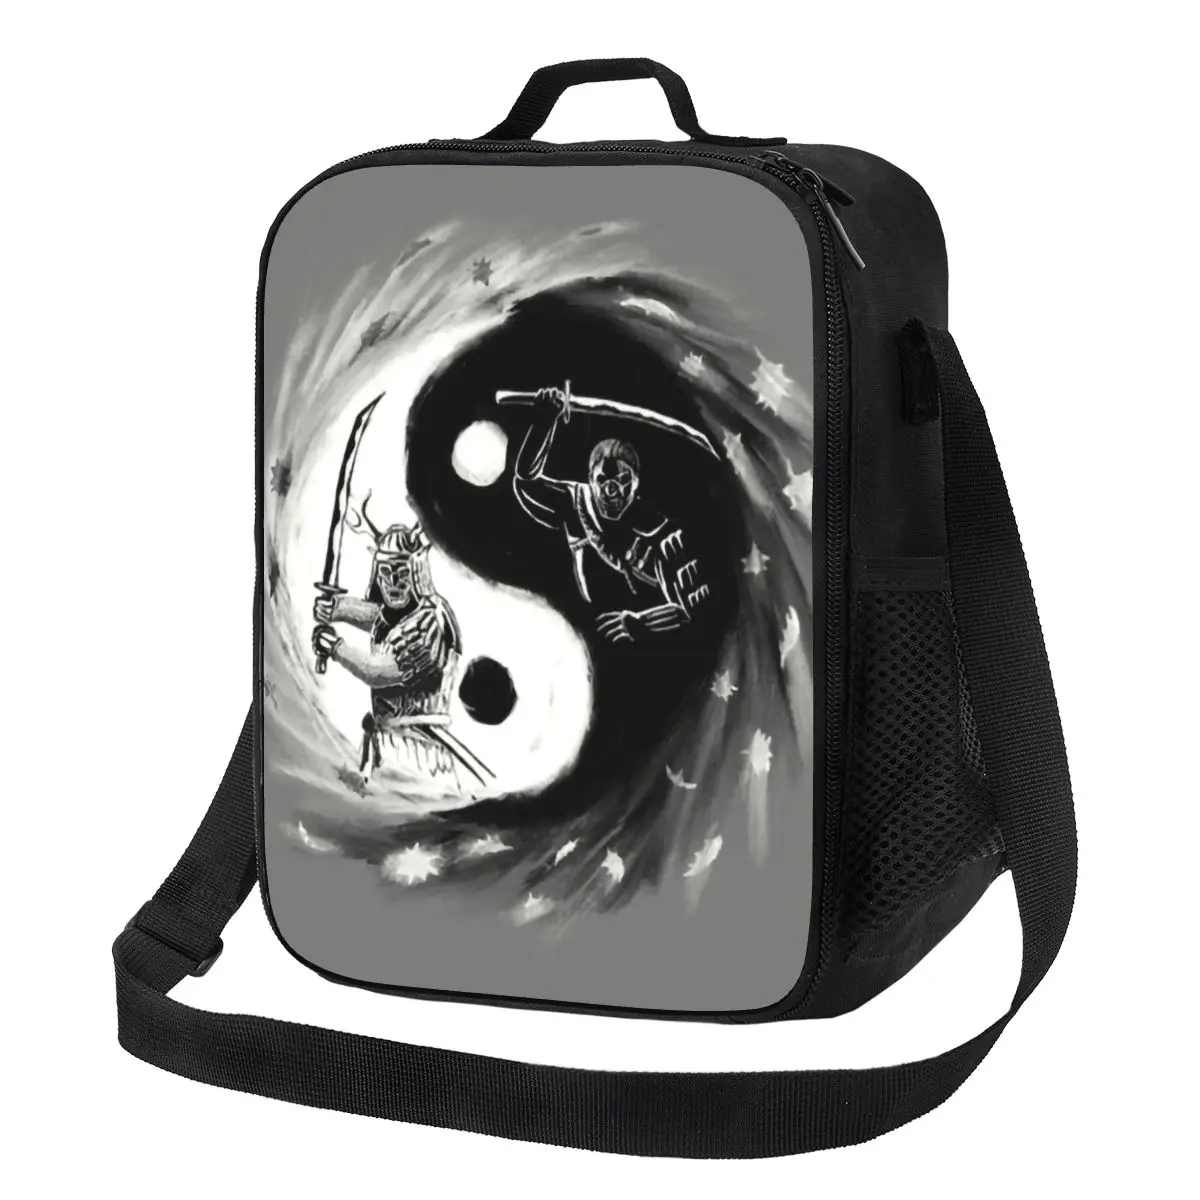 

Good And Ghost Thermal Insulated Lunch Bags Yin Yang Japan Samurai Lunch for Outdoor Camping Travel Storage Bento Food Box